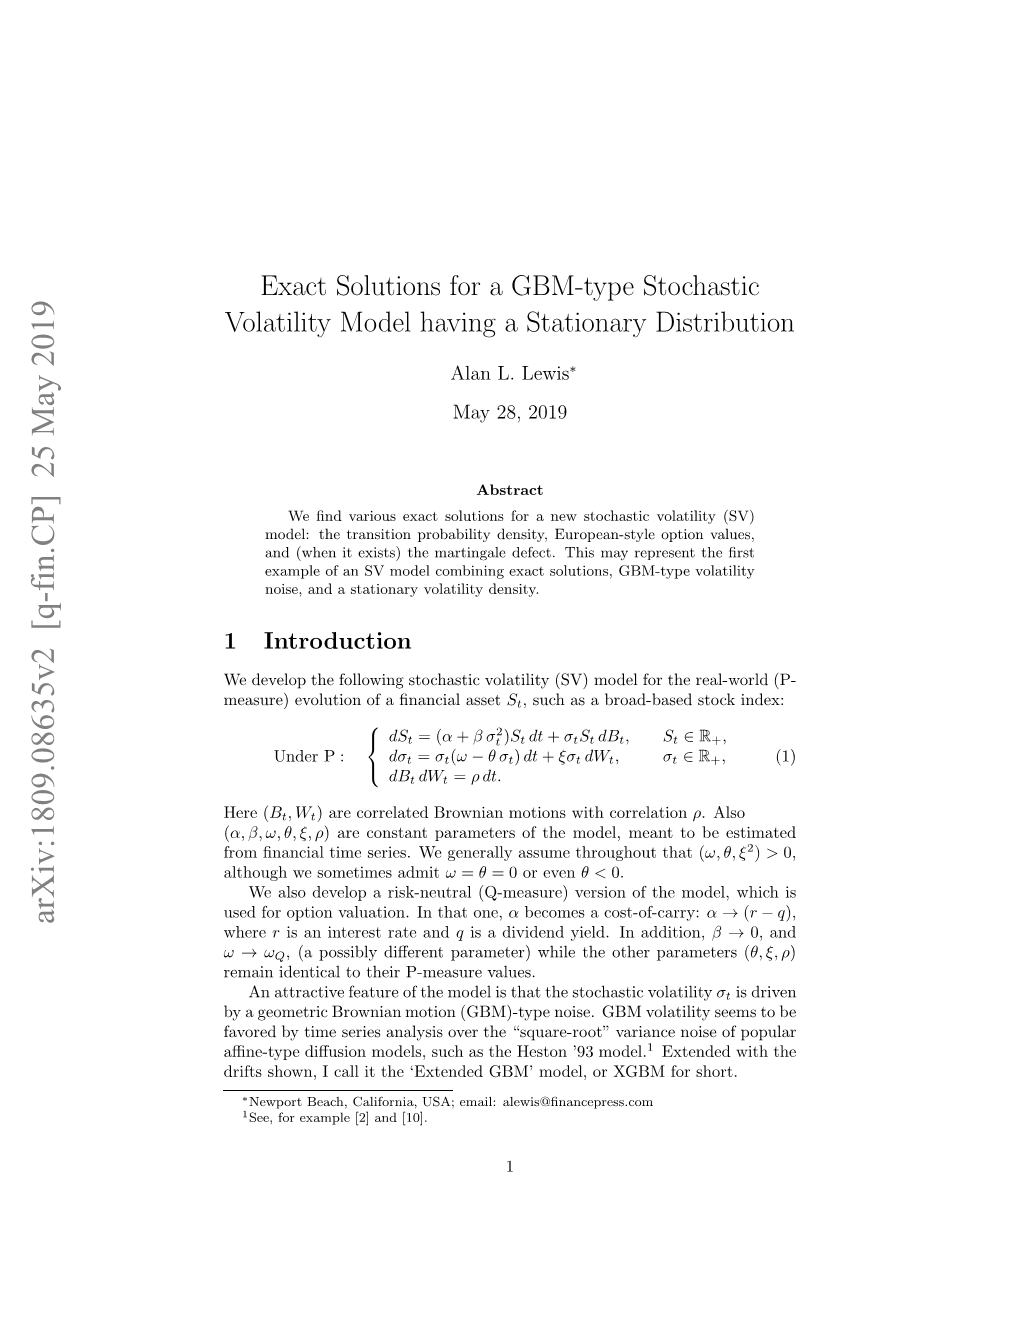 Exact Solutions for a GBM-Type Stochastic Volatility Model